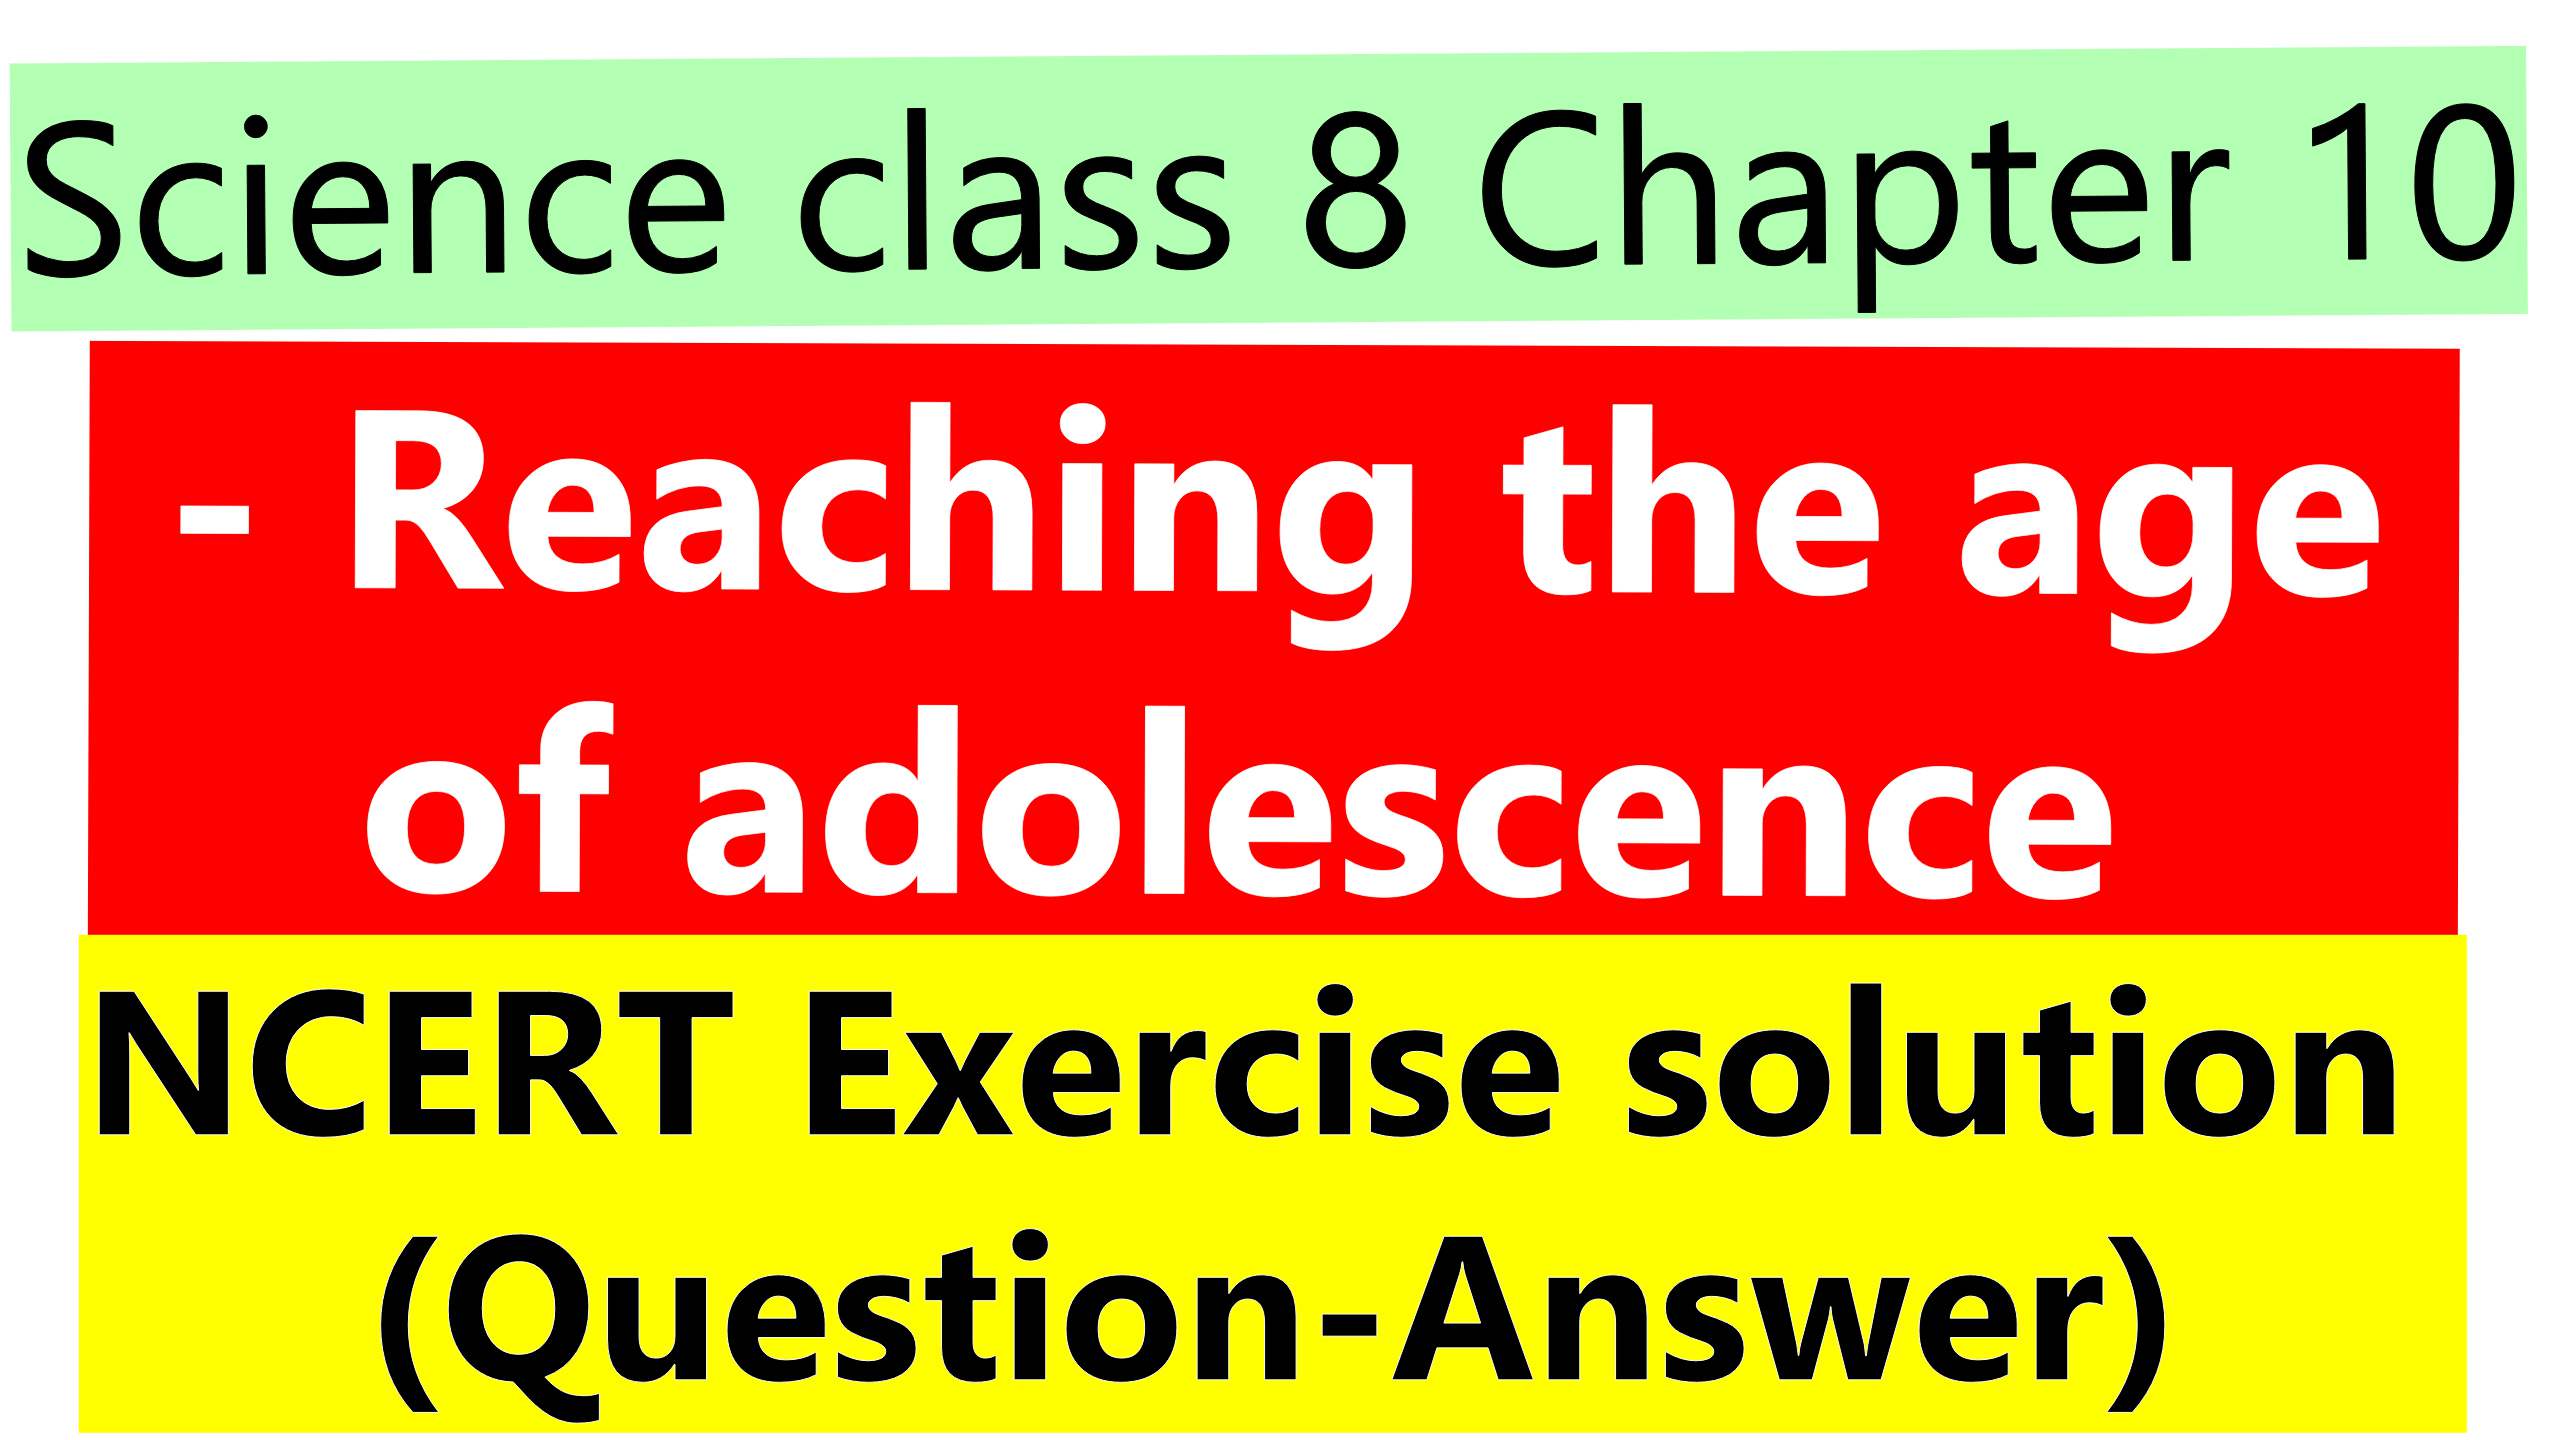 Science class 8 Chapter 10 - Reaching the age of adolescence NCERT Exercise solution (Question-Answer)